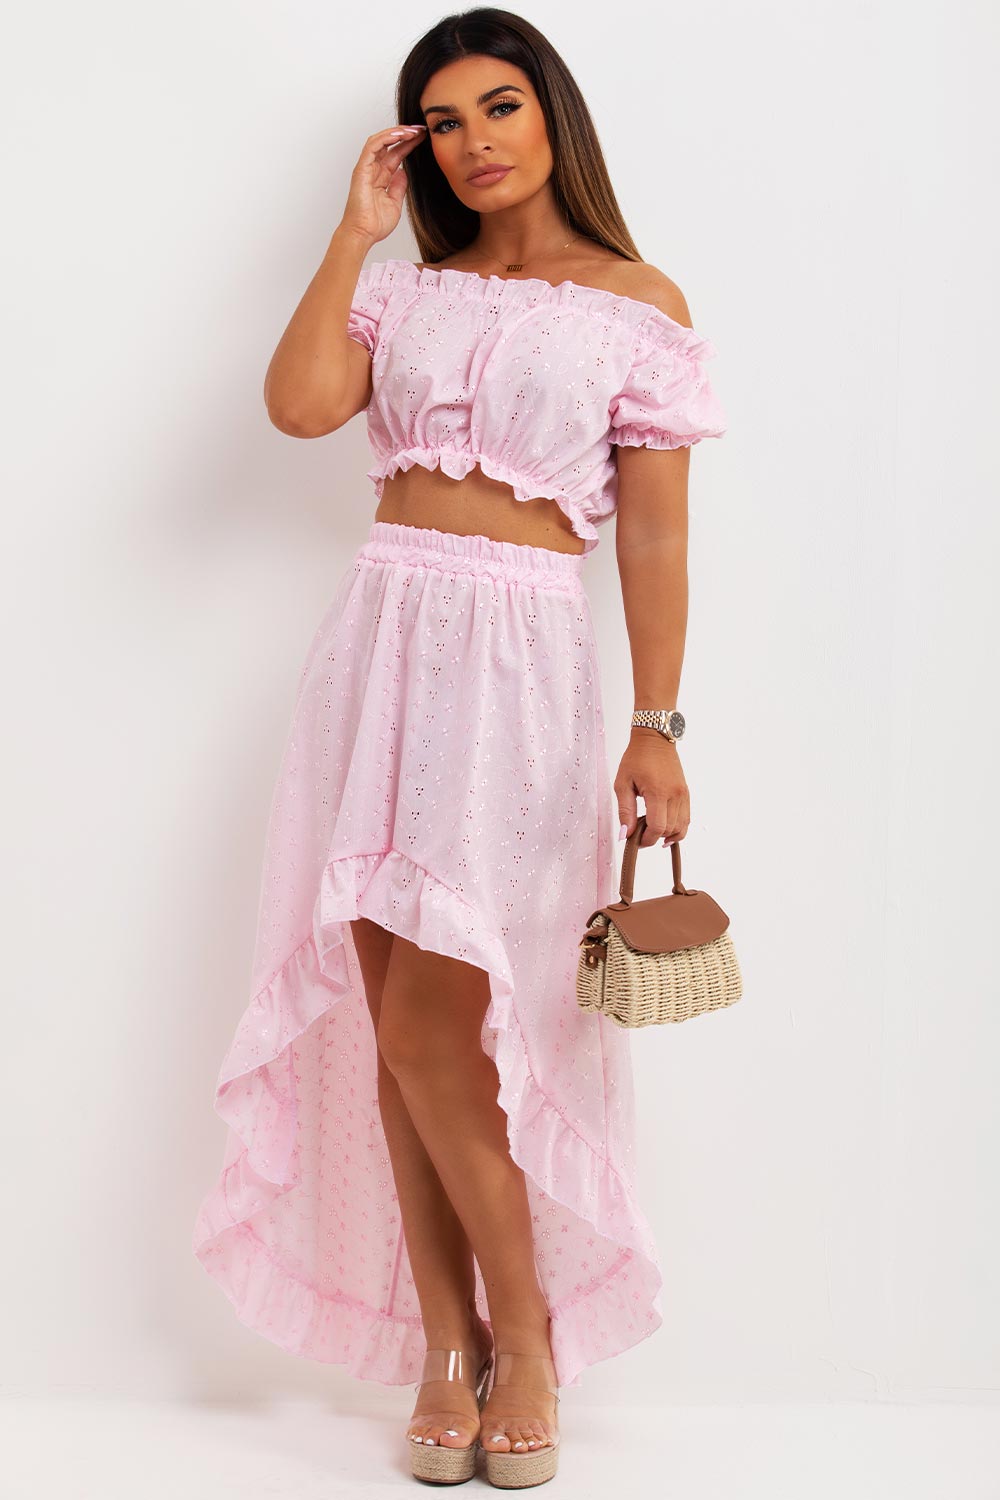 broderie anglaise high low skirt and off shoulder crop top co ord set uk